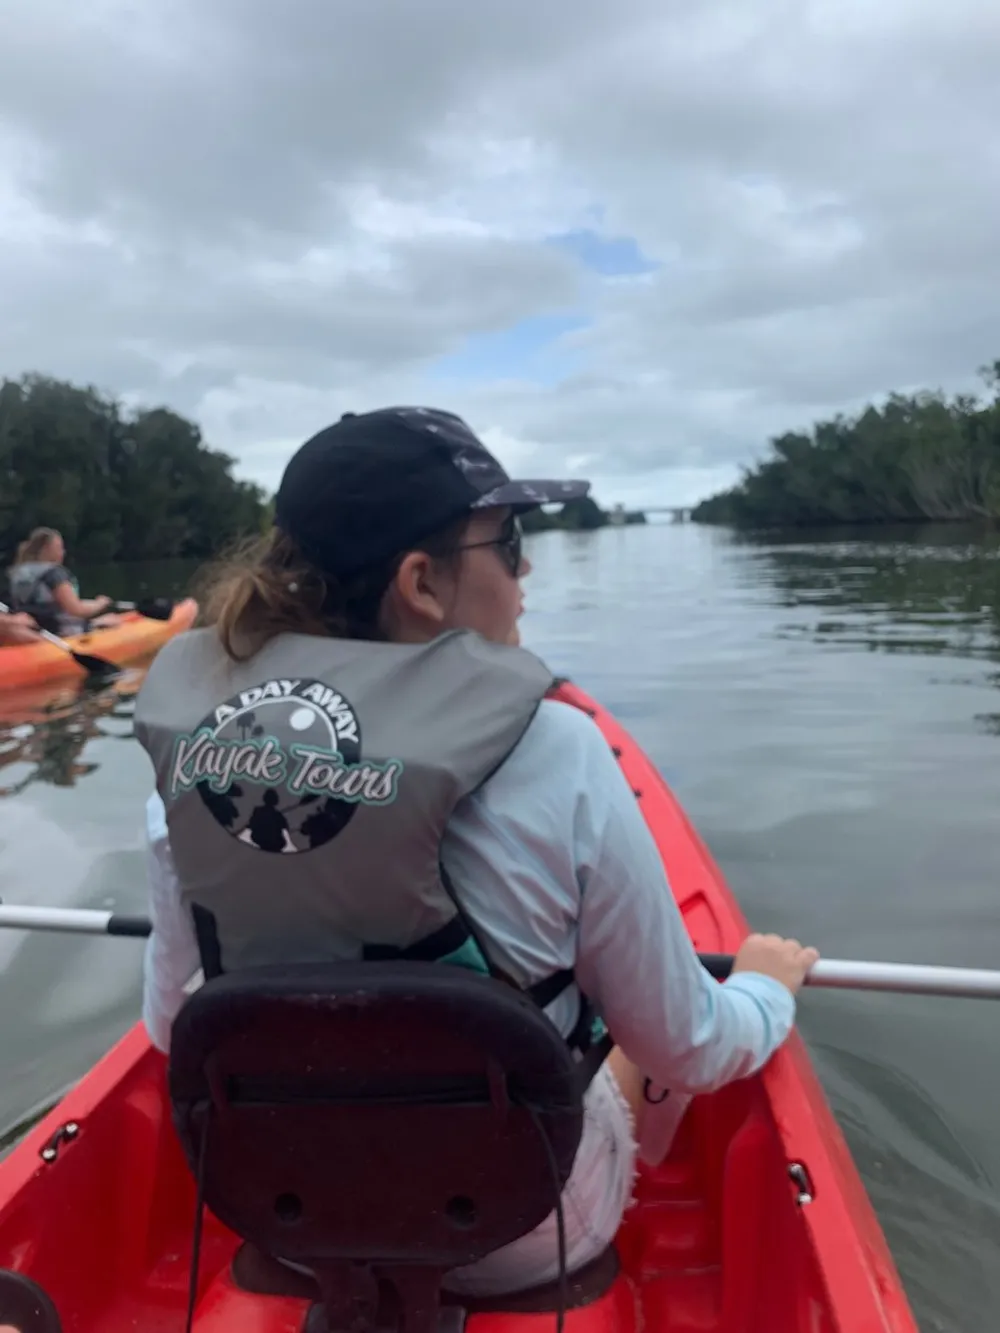 A person is seen from behind while kayaking on a cloudy day wearing a cap and a life vest labeled A Day Away Kayak Tours